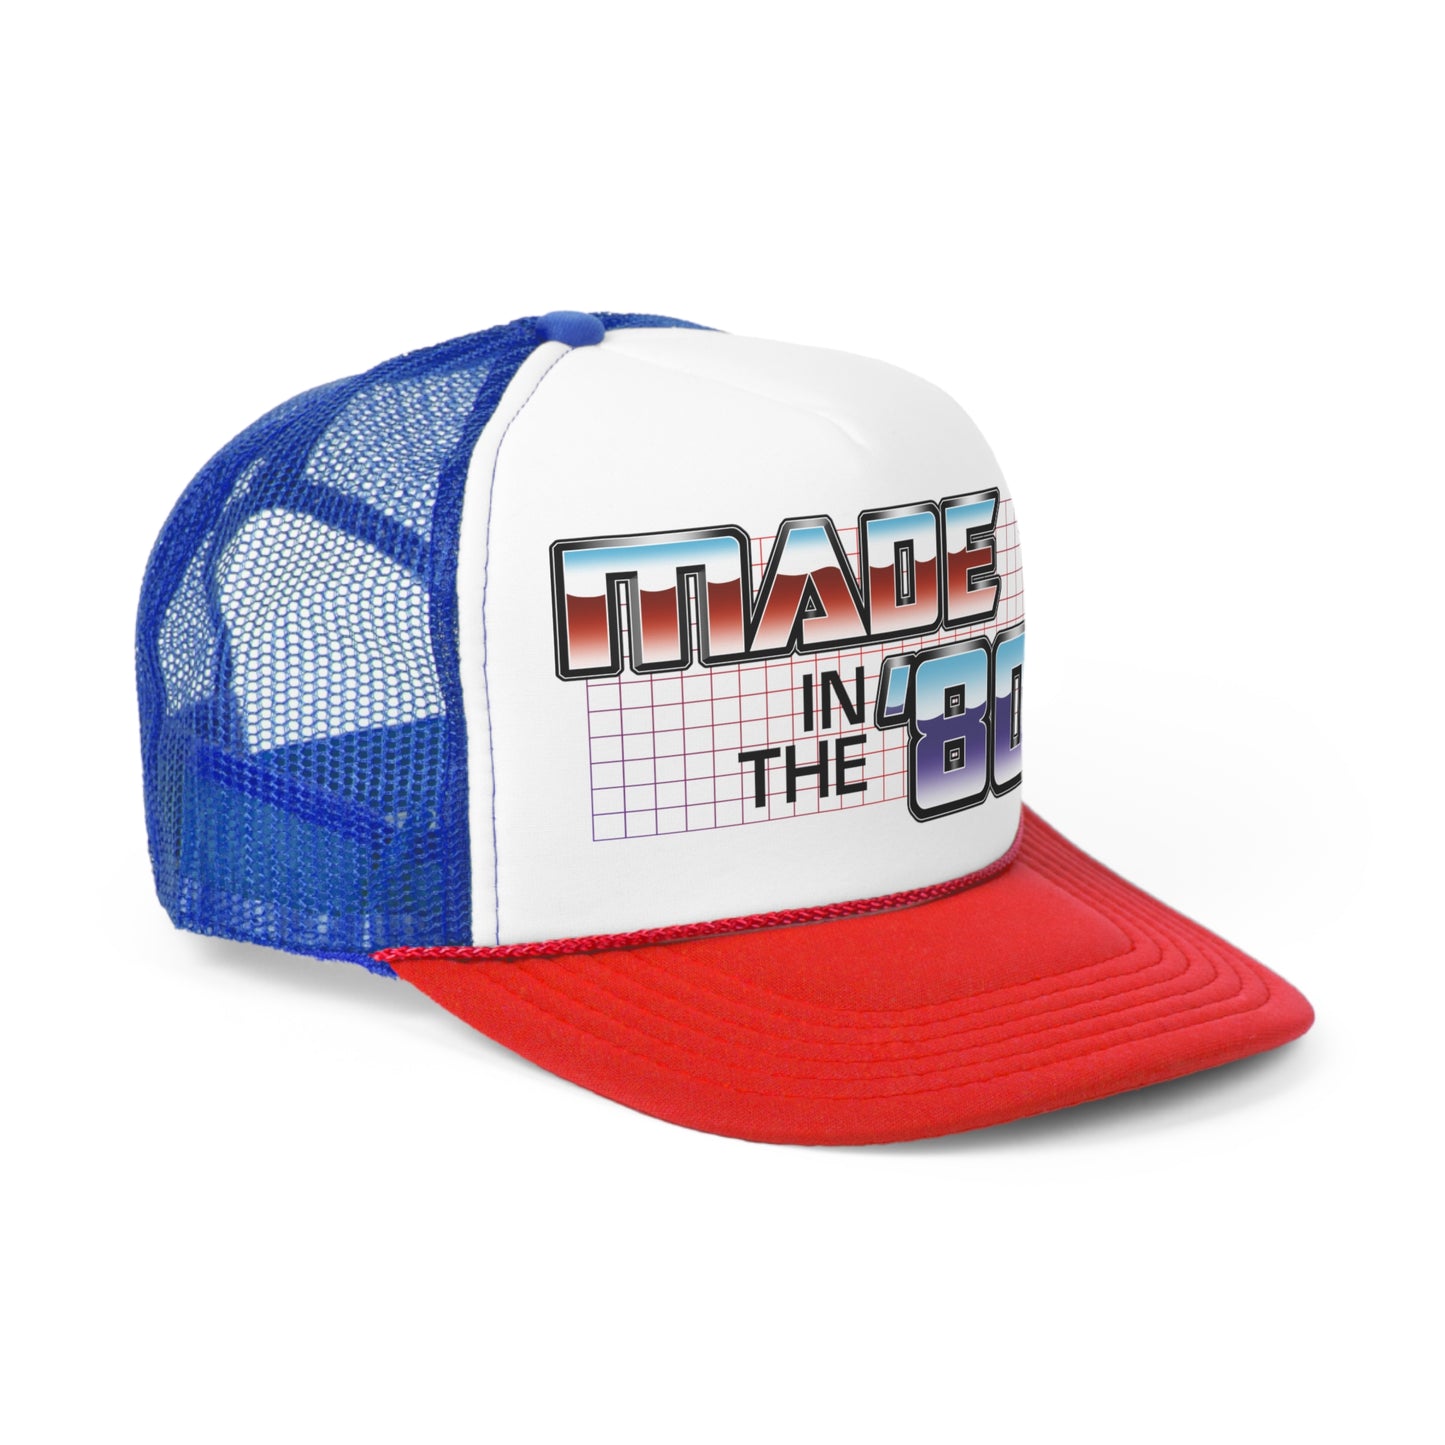 Made in the '80s trucker hat